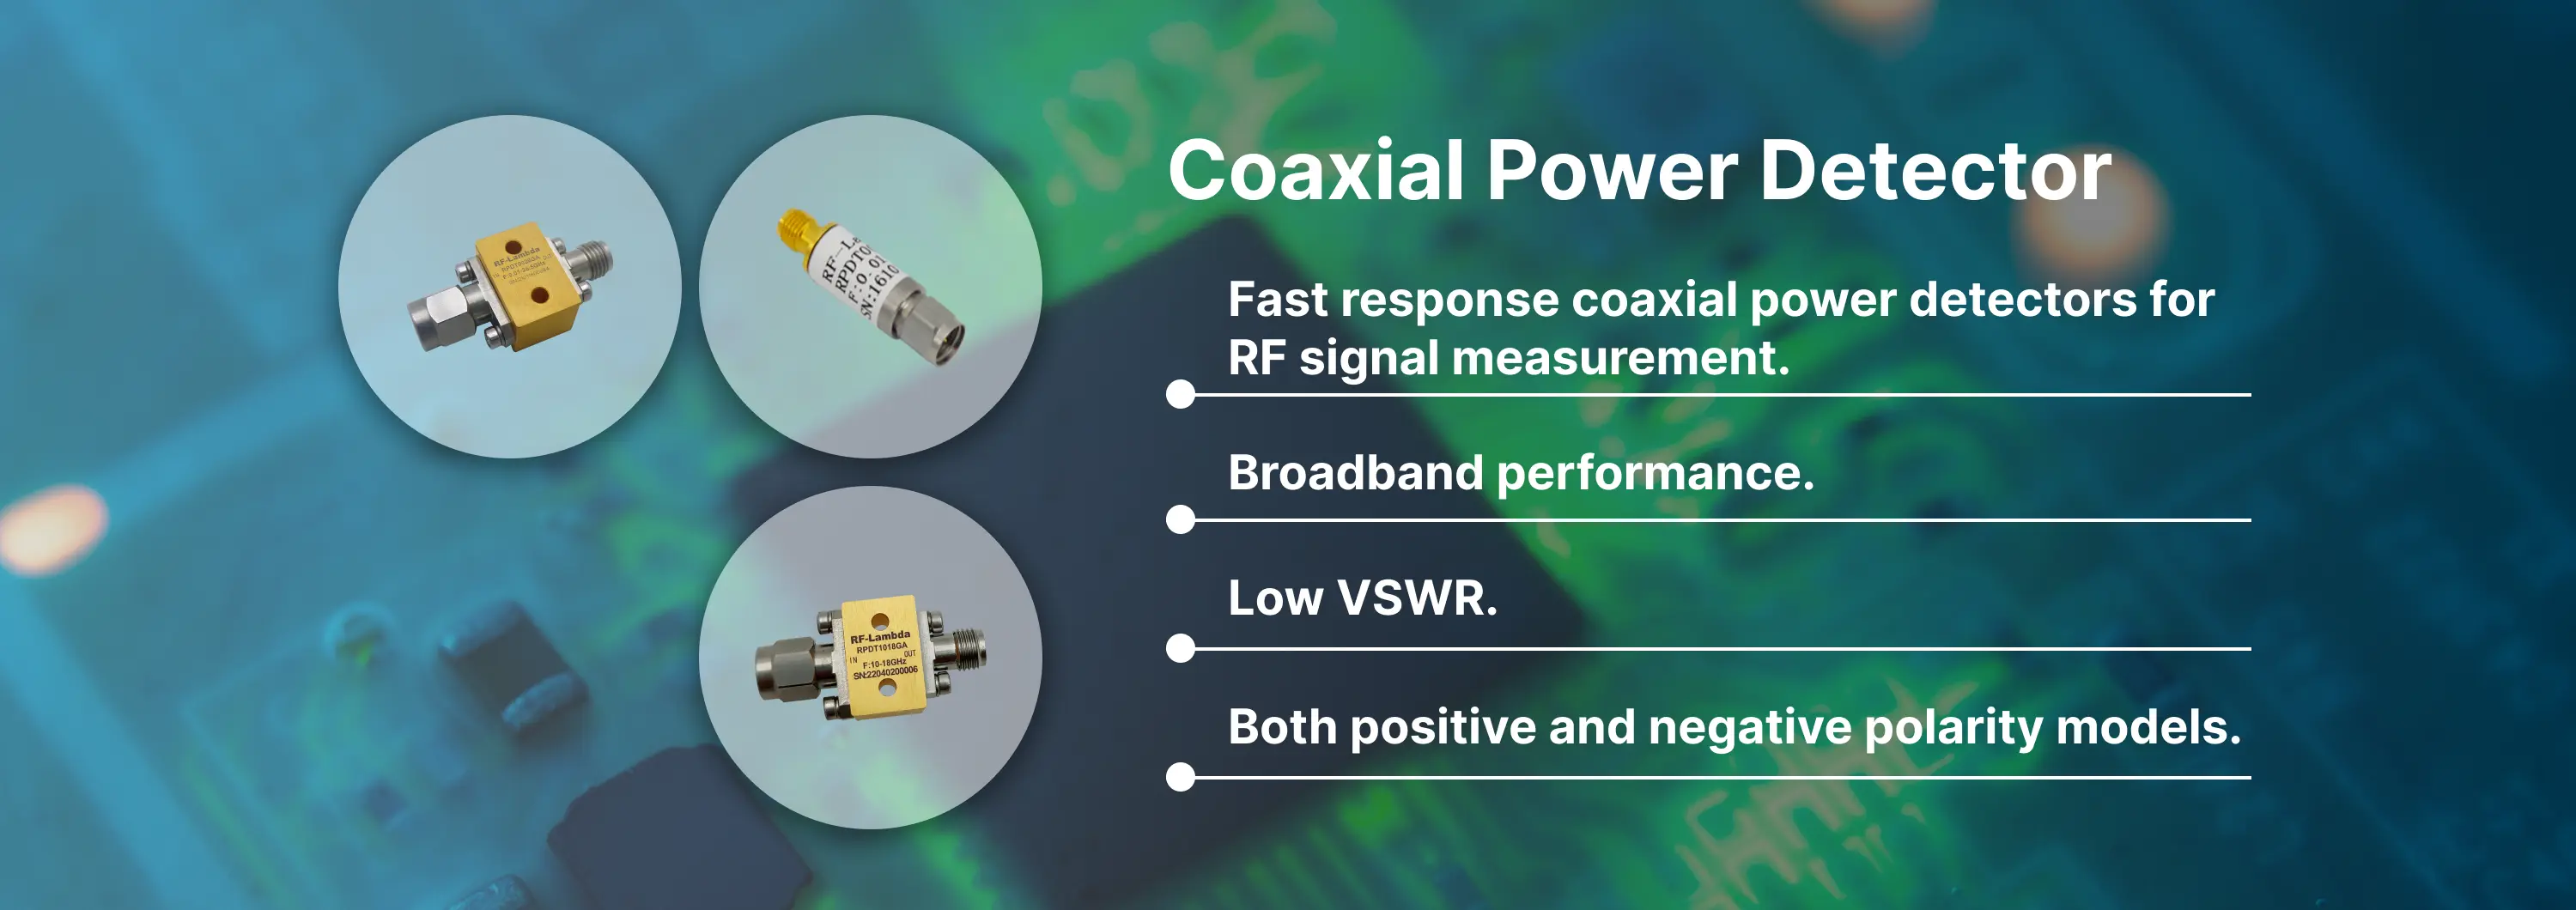 Coaxial Power Detector Banner